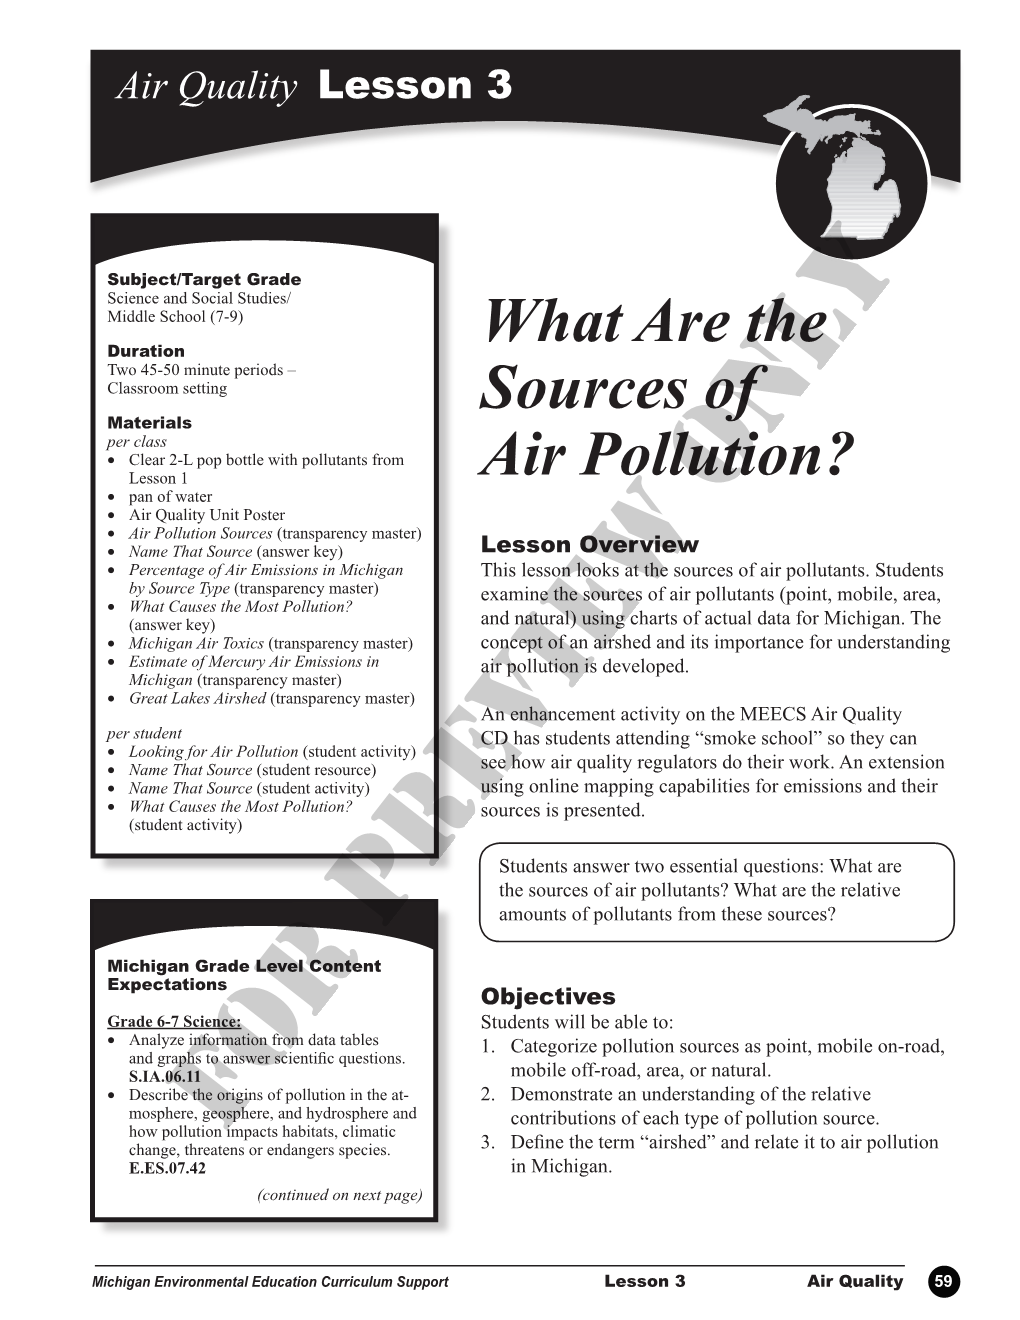 What Are the Sources of Air Pollution?